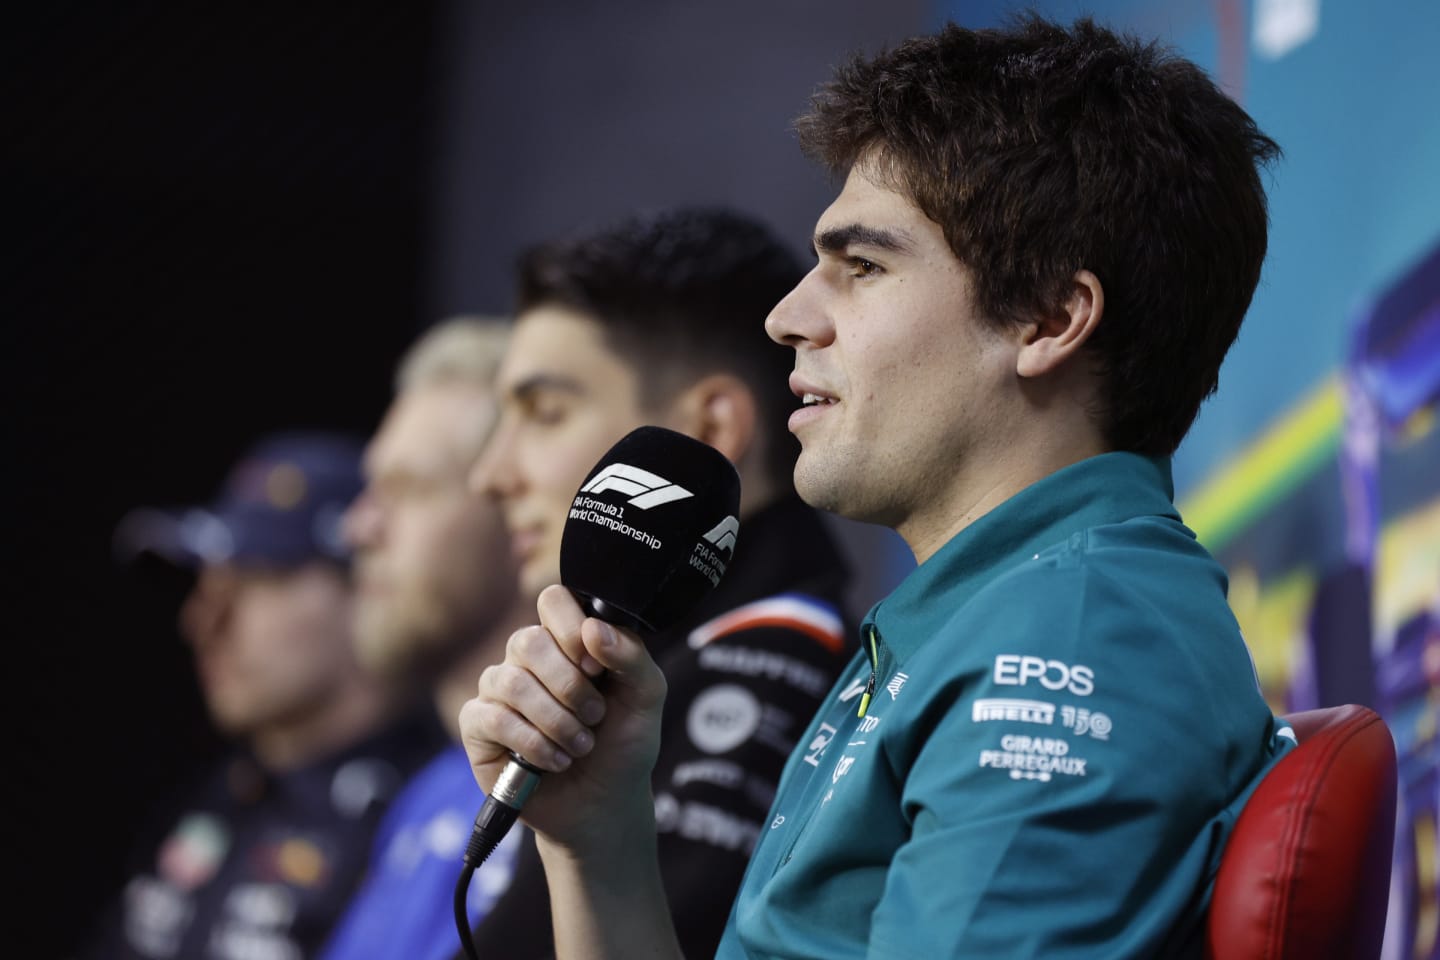 SAO PAULO, BRAZIL - NOVEMBER 10: Lance Stroll of Canada and Aston Martin F1 Team attends the Drivers Press Conference during previews ahead of the F1 Grand Prix of Brazil at Autodromo Jose Carlos Pace on November 10, 2022 in Sao Paulo, Brazil. (Photo by Jared C. Tilton/Getty Images)